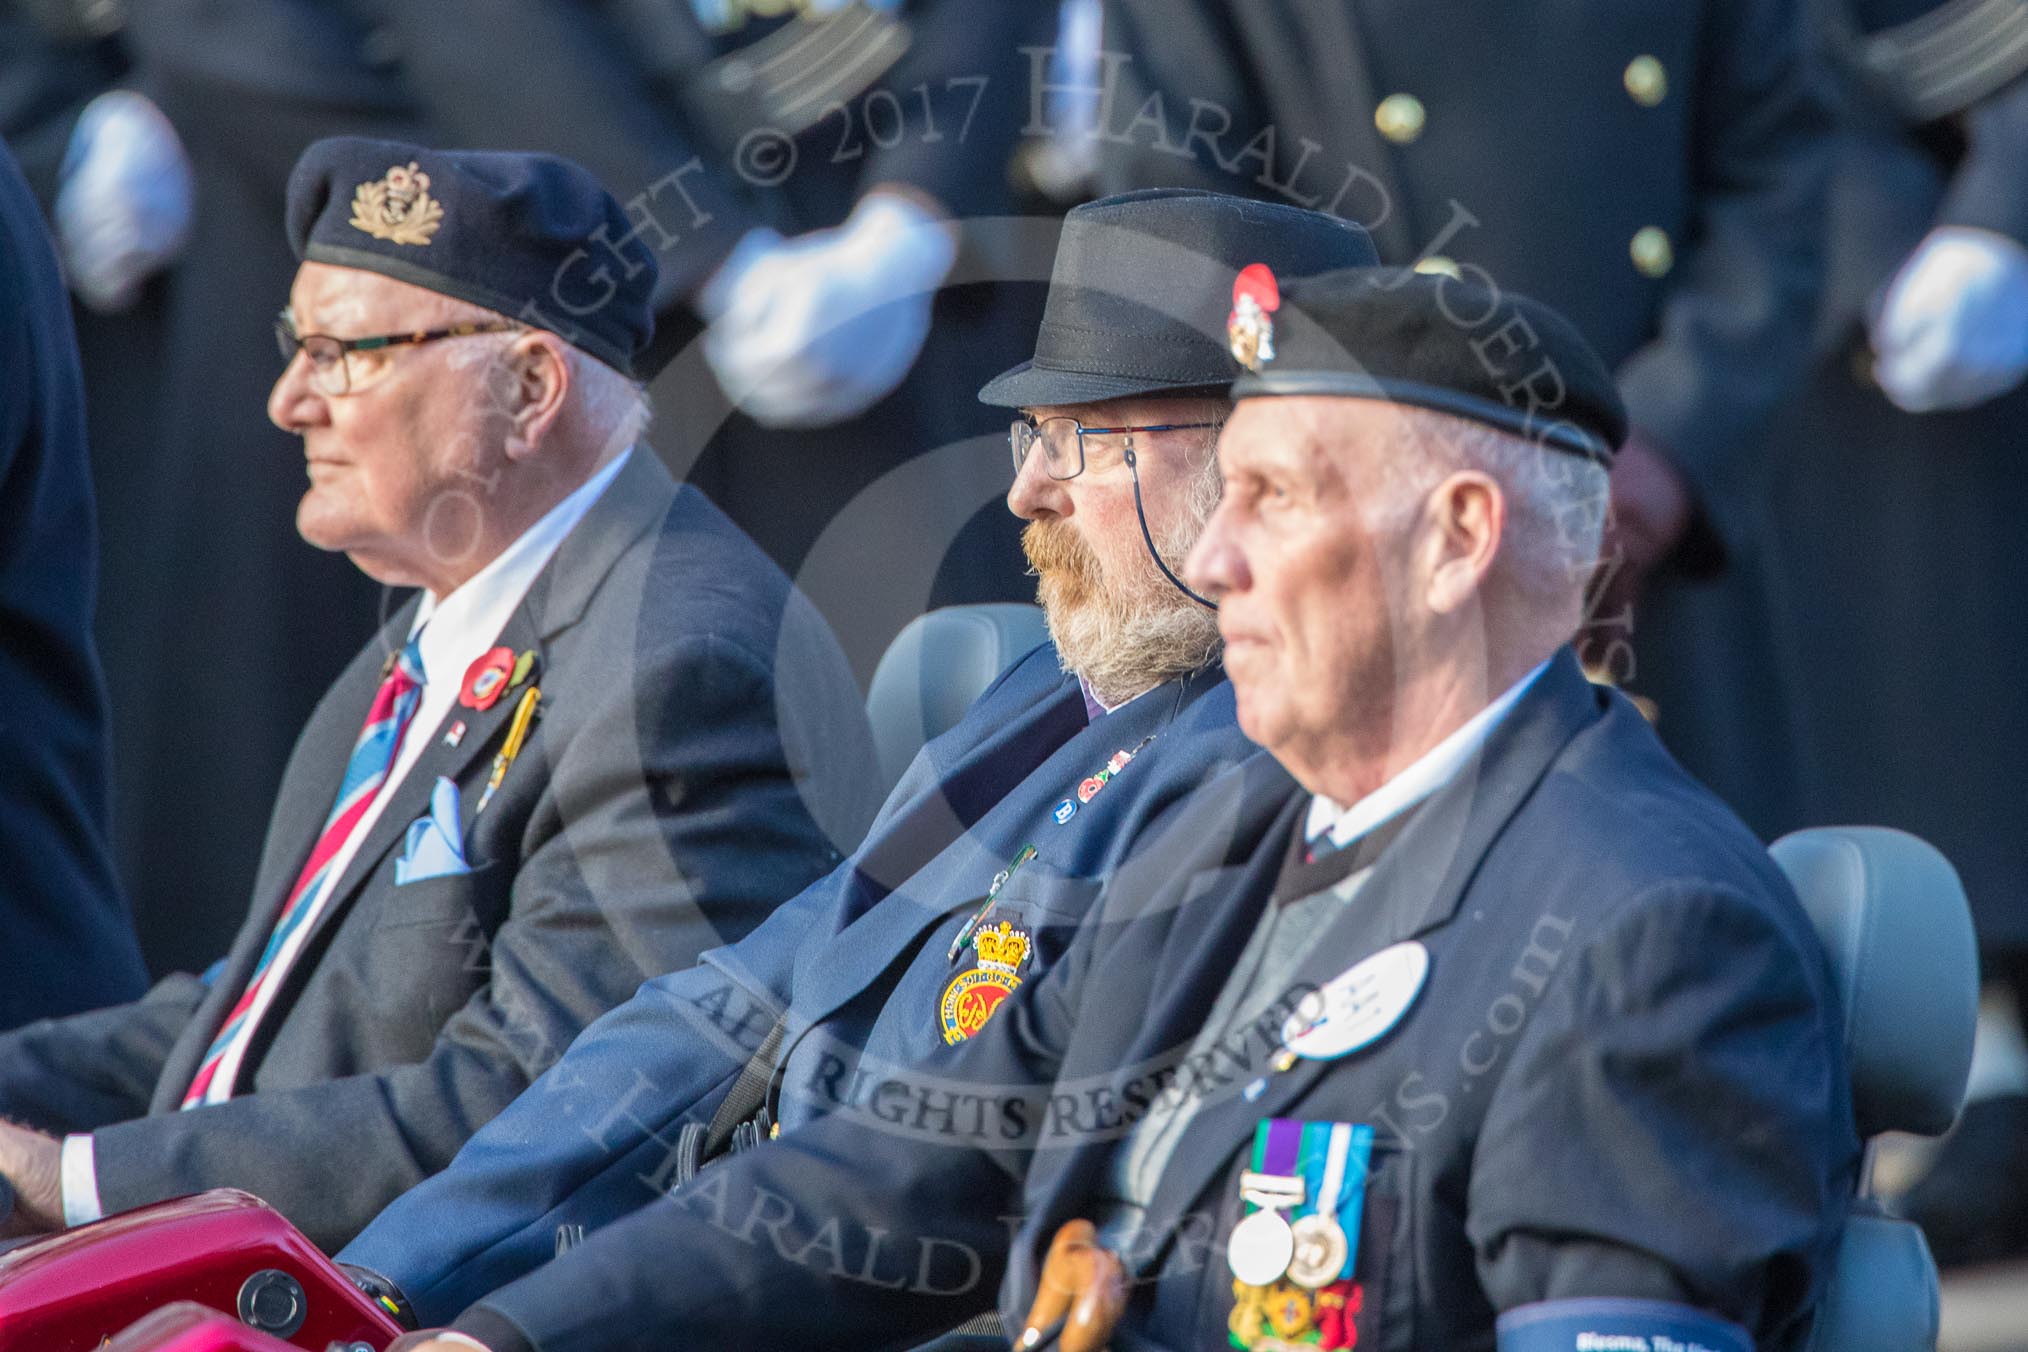 Blesma, The Limbless Veterans (Group AA1, 55 members) during the Royal British Legion March Past on Remembrance Sunday at the Cenotaph, Whitehall, Westminster, London, 11 November 2018, 11:47.